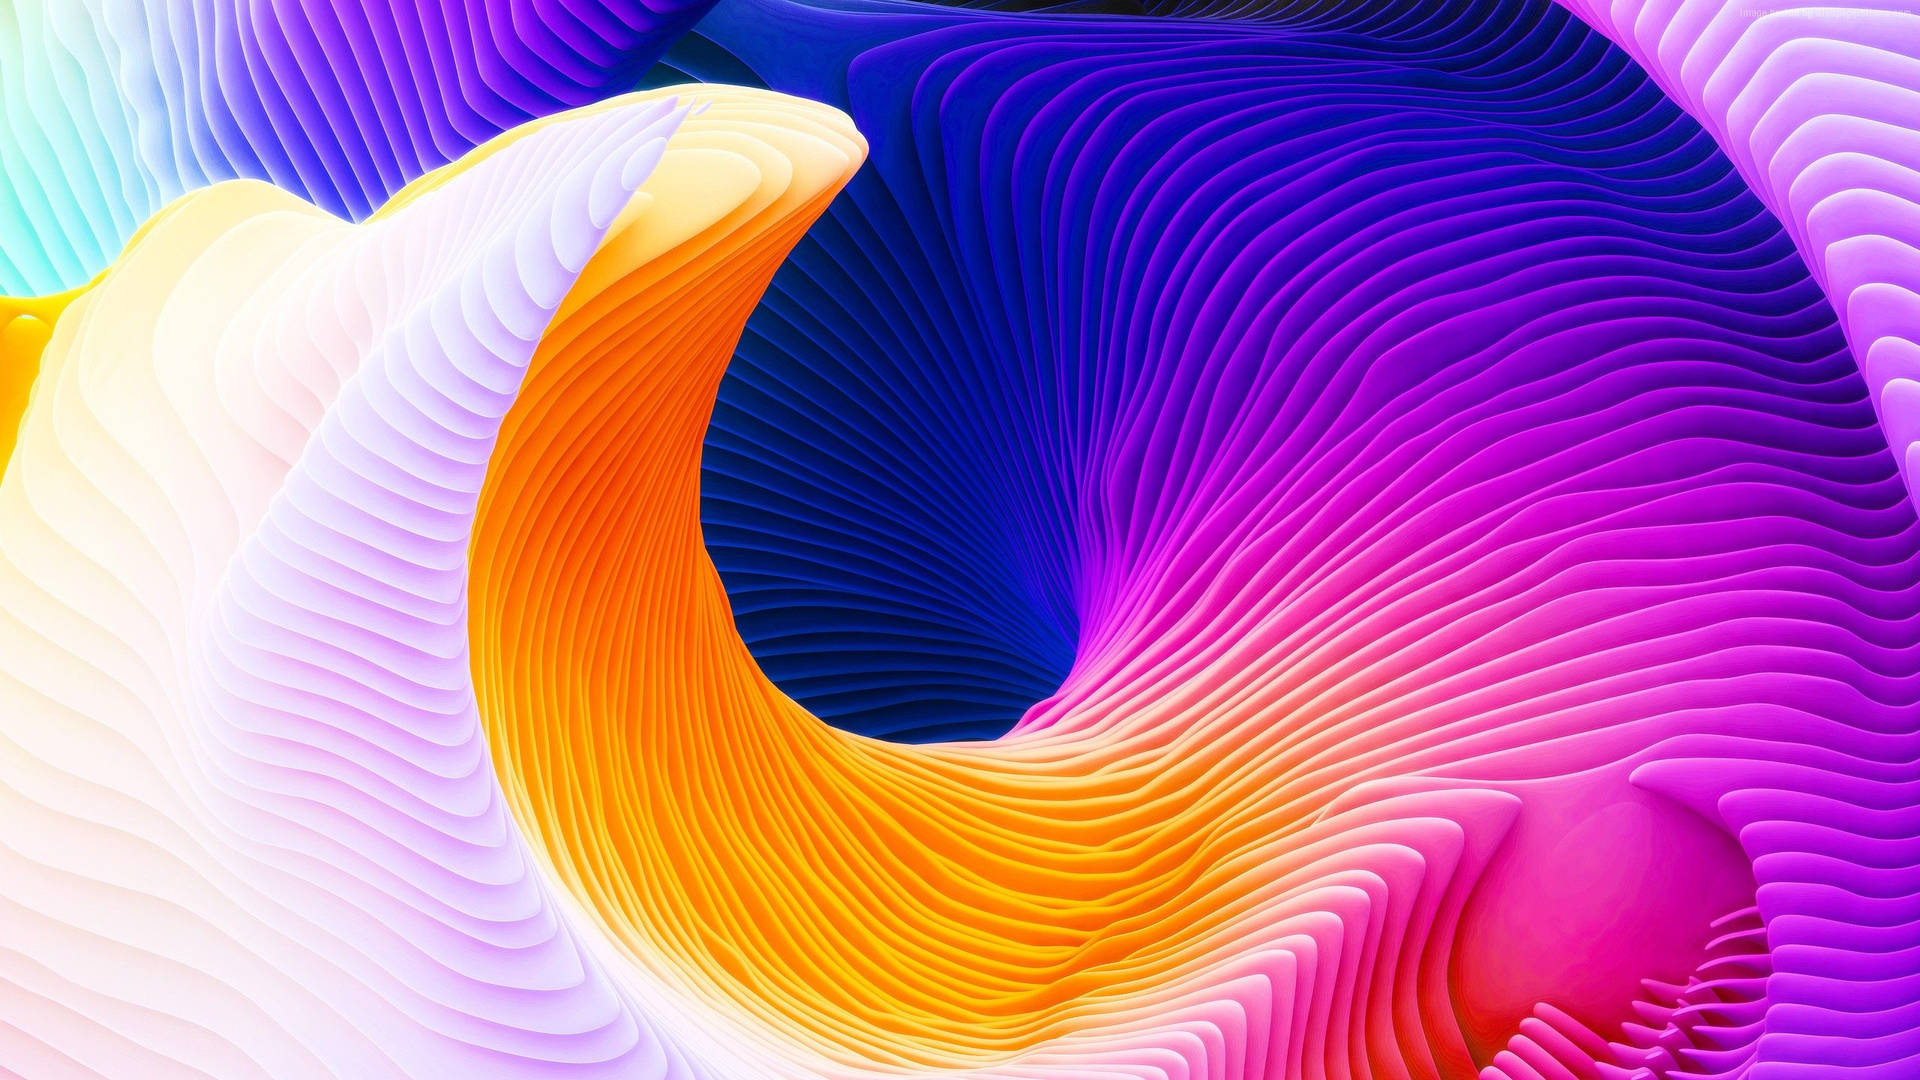 Colorful Abstract Illustration Macbook Pro Aesthetic Background